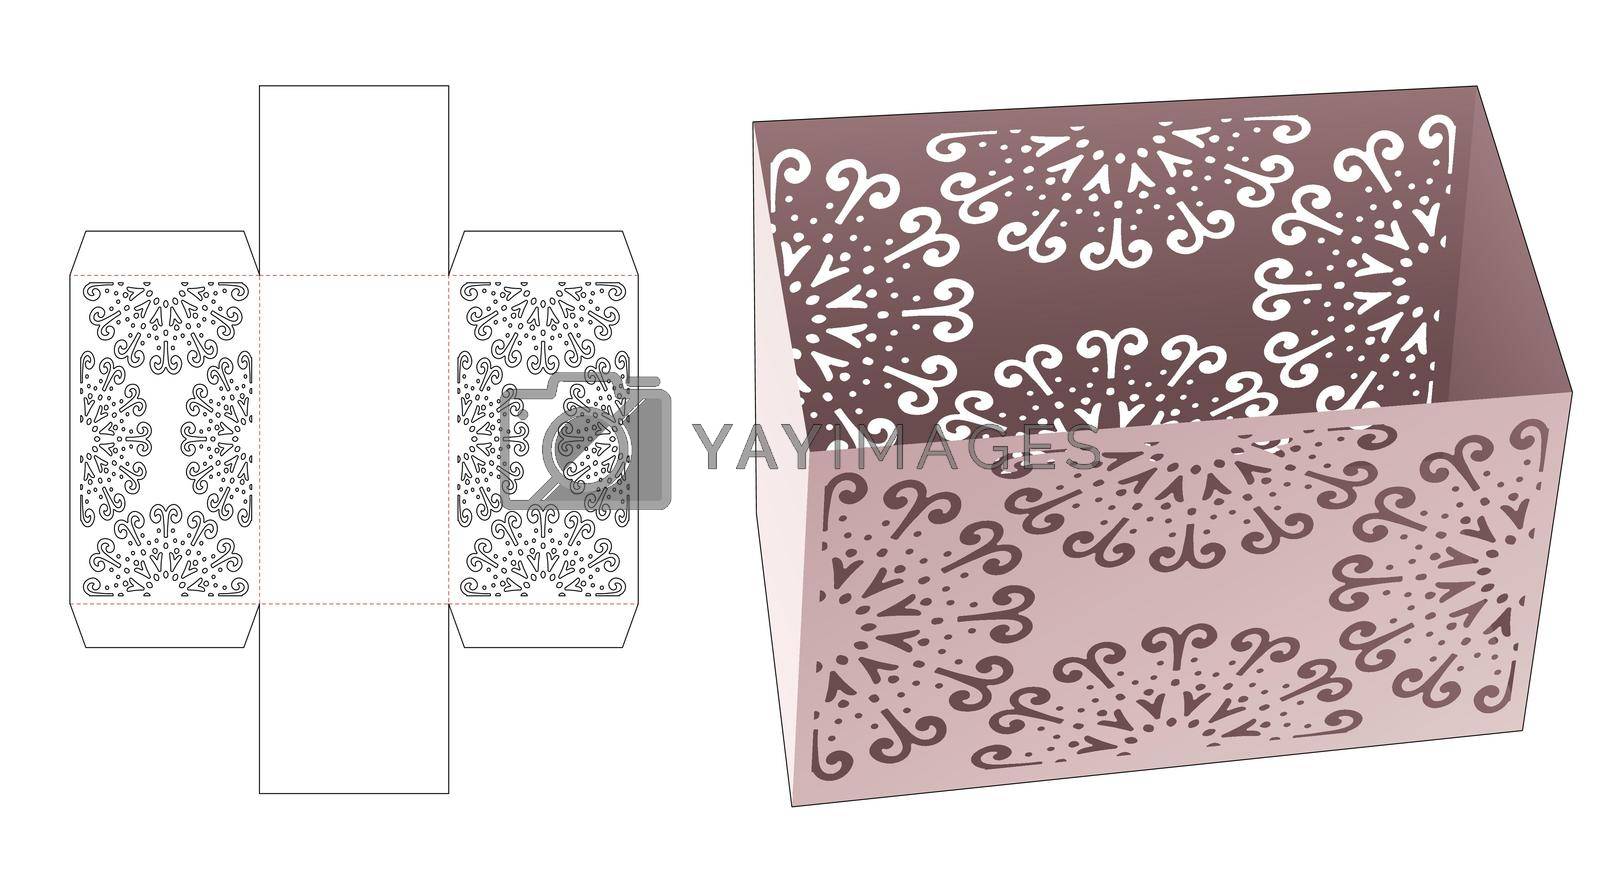 Royalty free image of Stationery box with stenciled mandala die cut template by valueinvestor